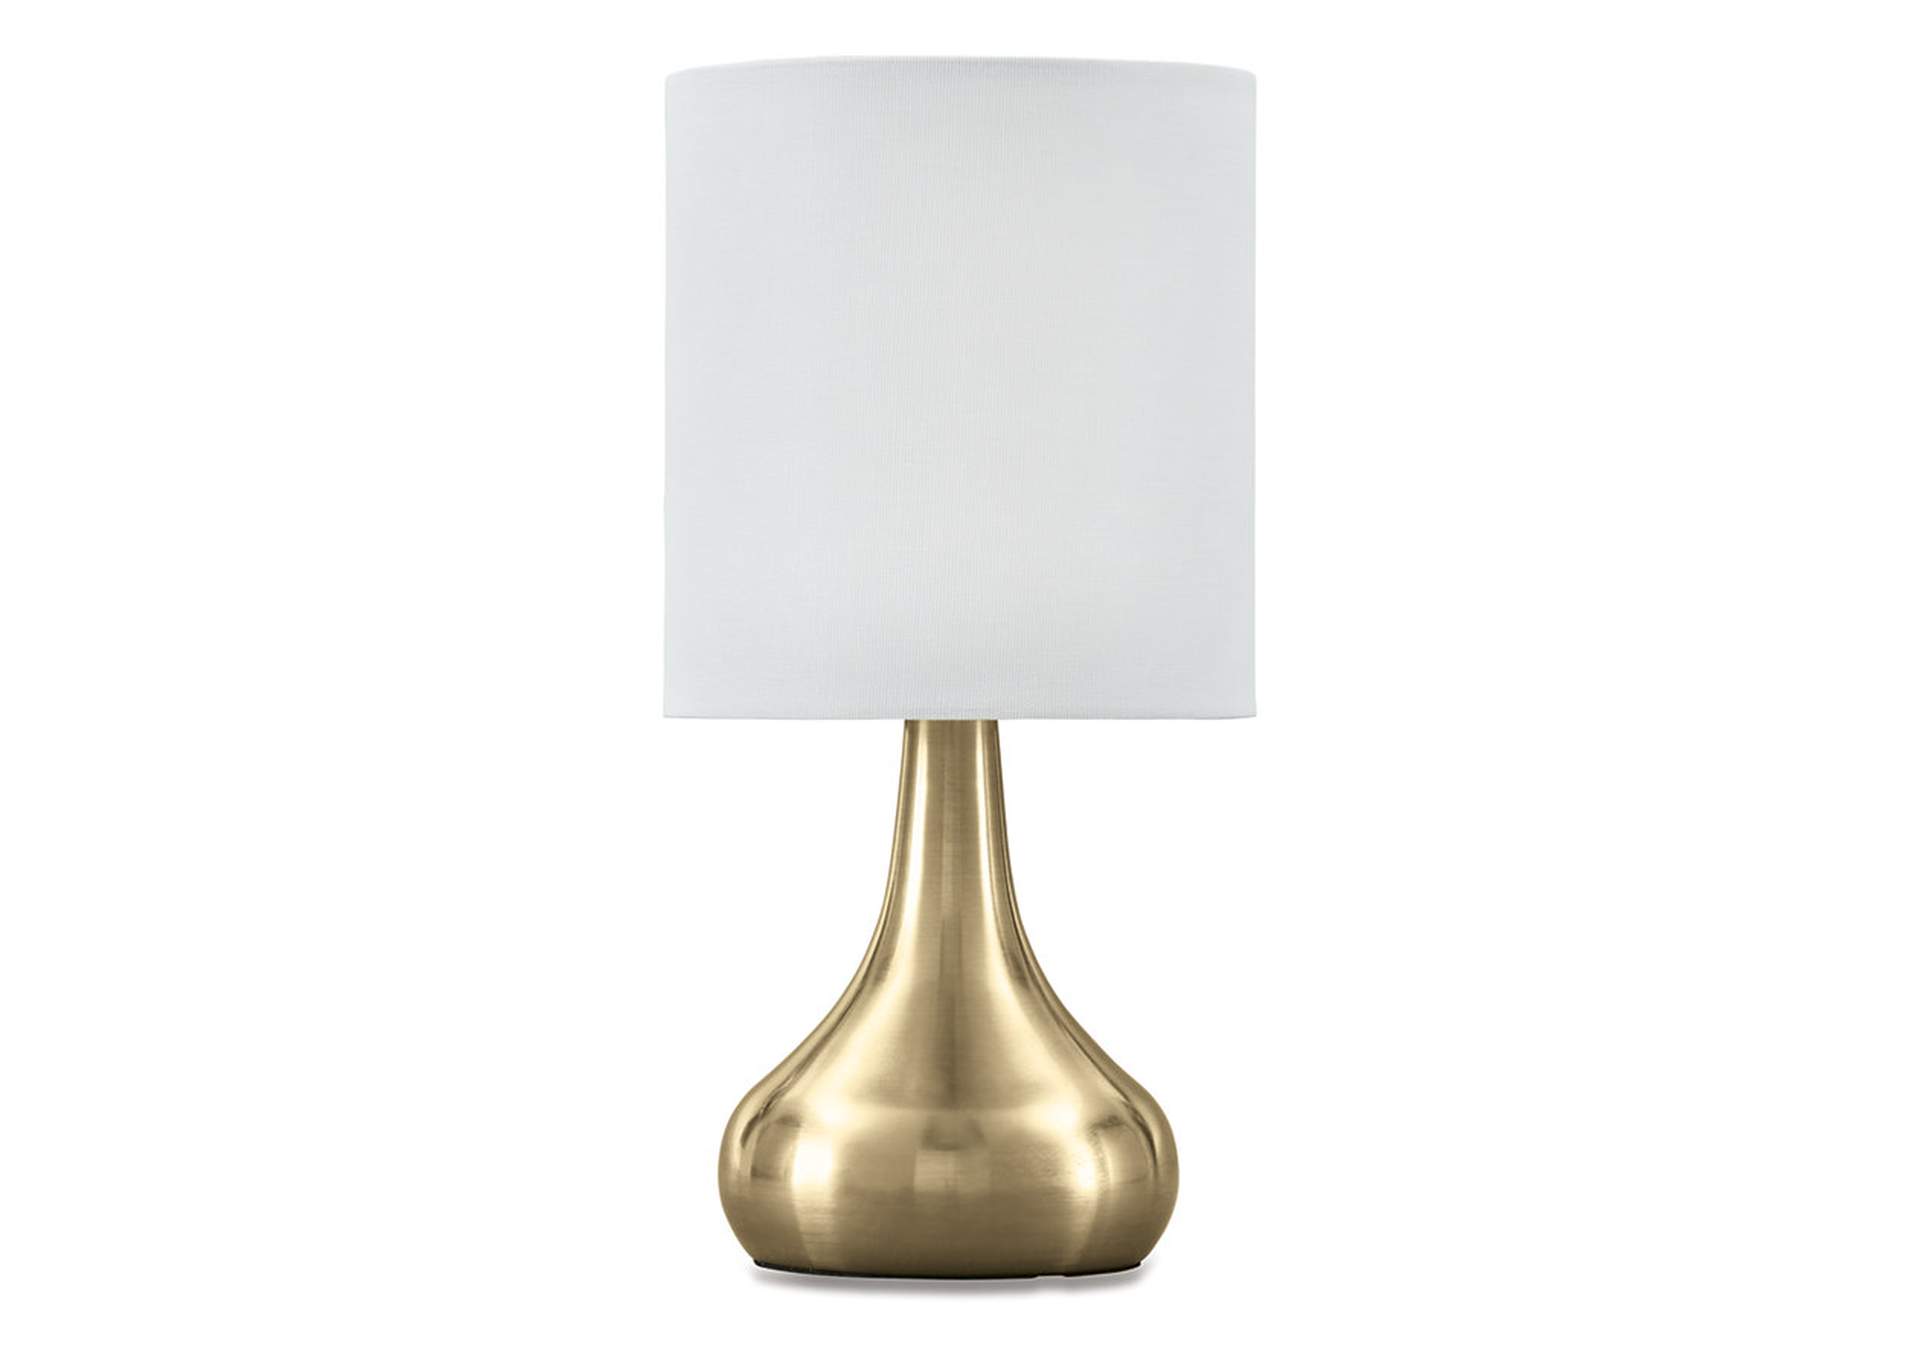 Camdale Table Lamp,Signature Design By Ashley